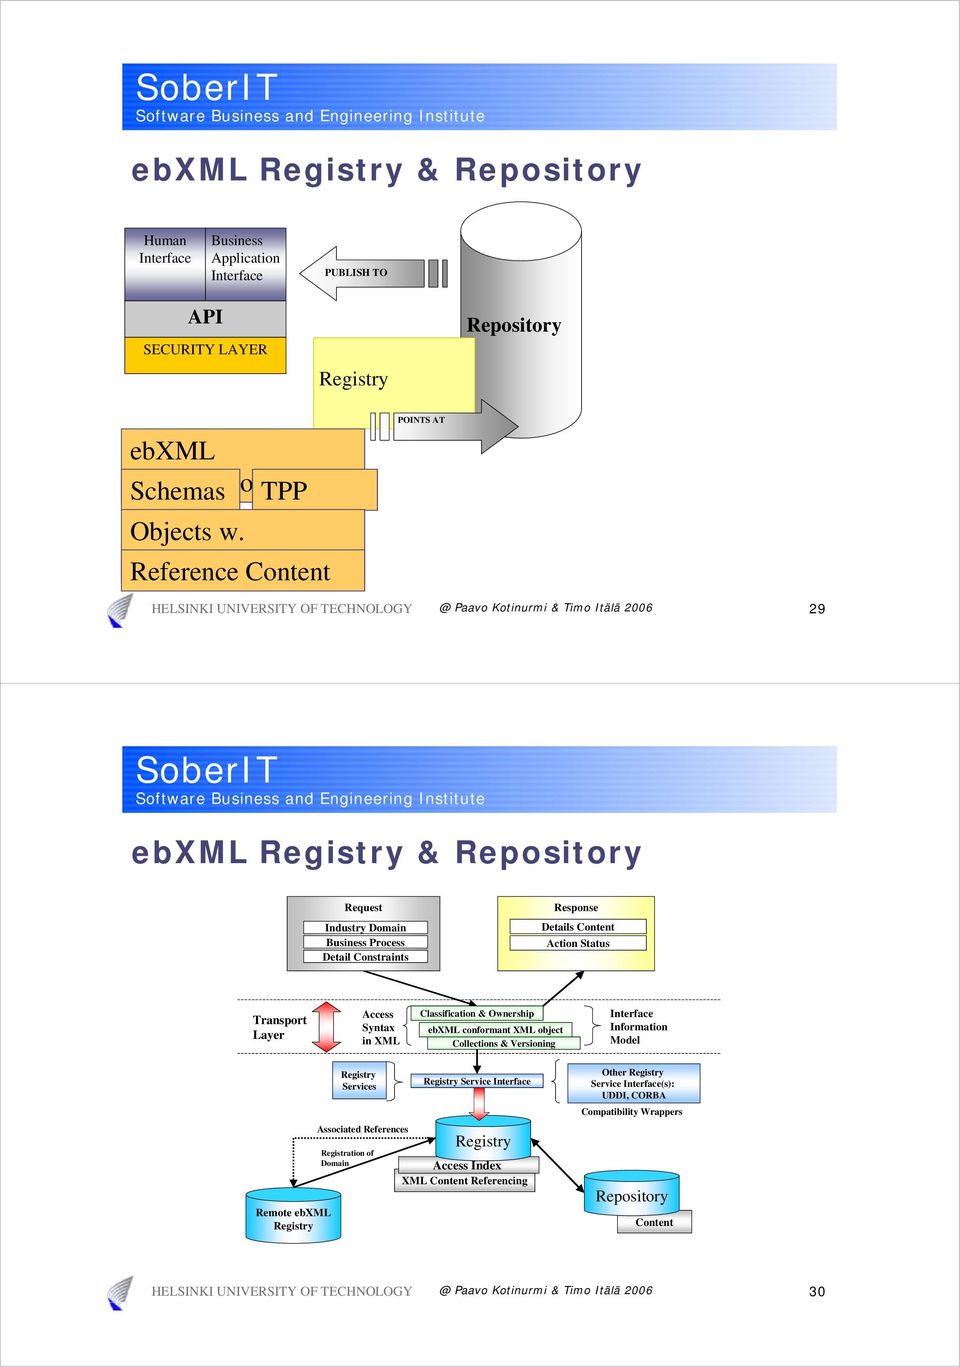 Status Transport Layer Access Syntax in XML Classification & Ownership ebxml conformant XML object Collections & Versioning Interface Information Model Remote ebxml Registry Registry Services